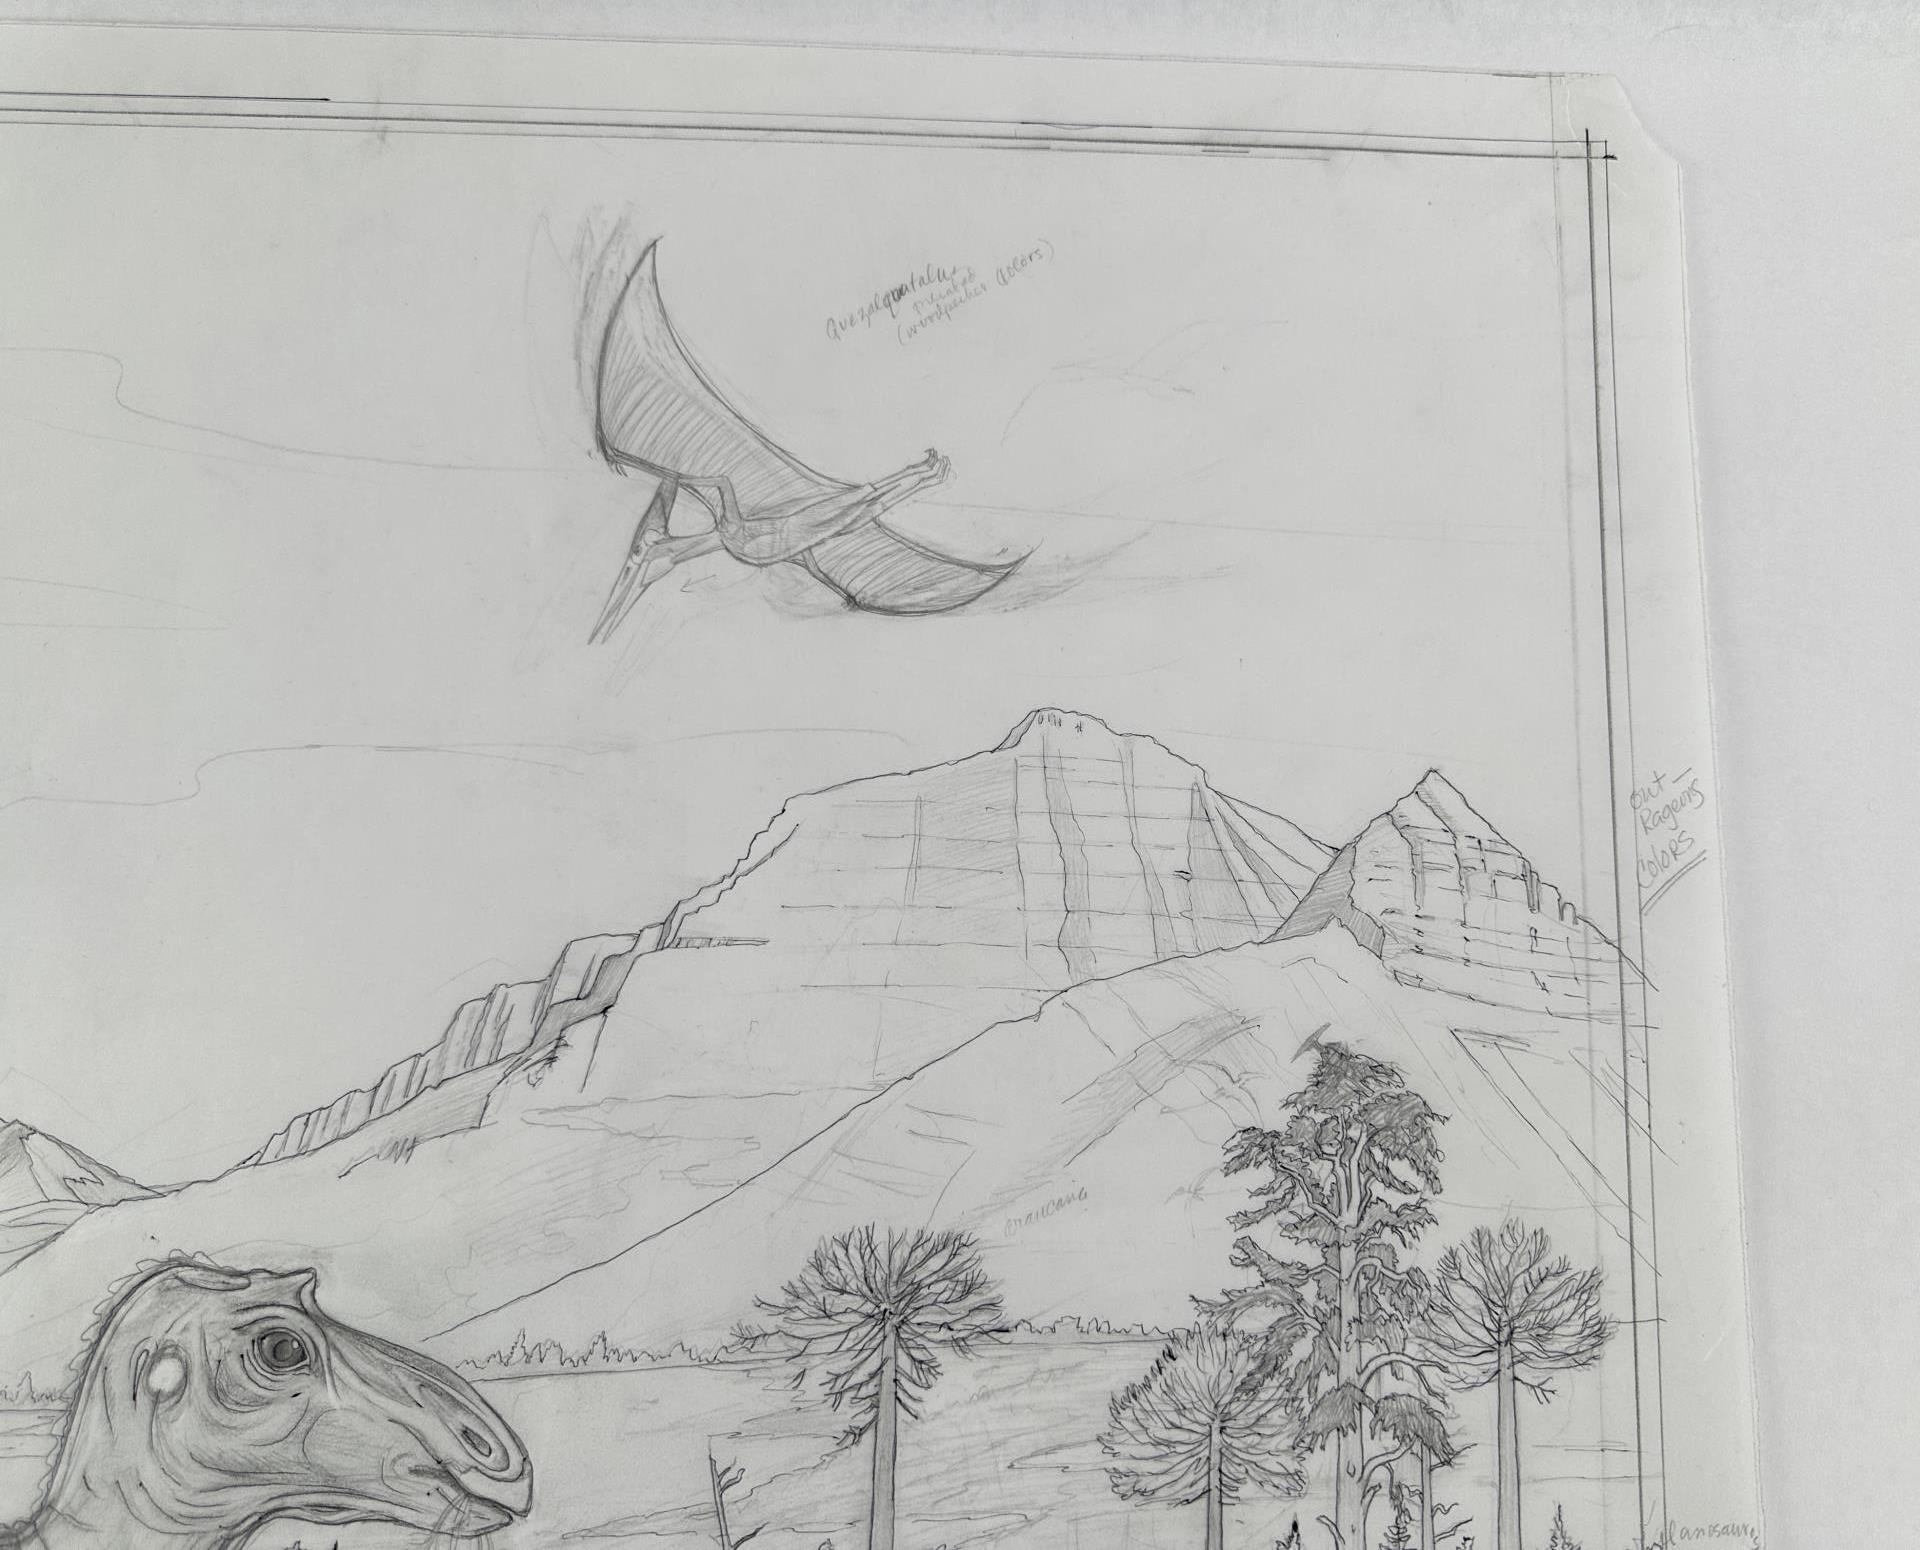 Monte Dolack Dinosaurs Discoveries Poster Study